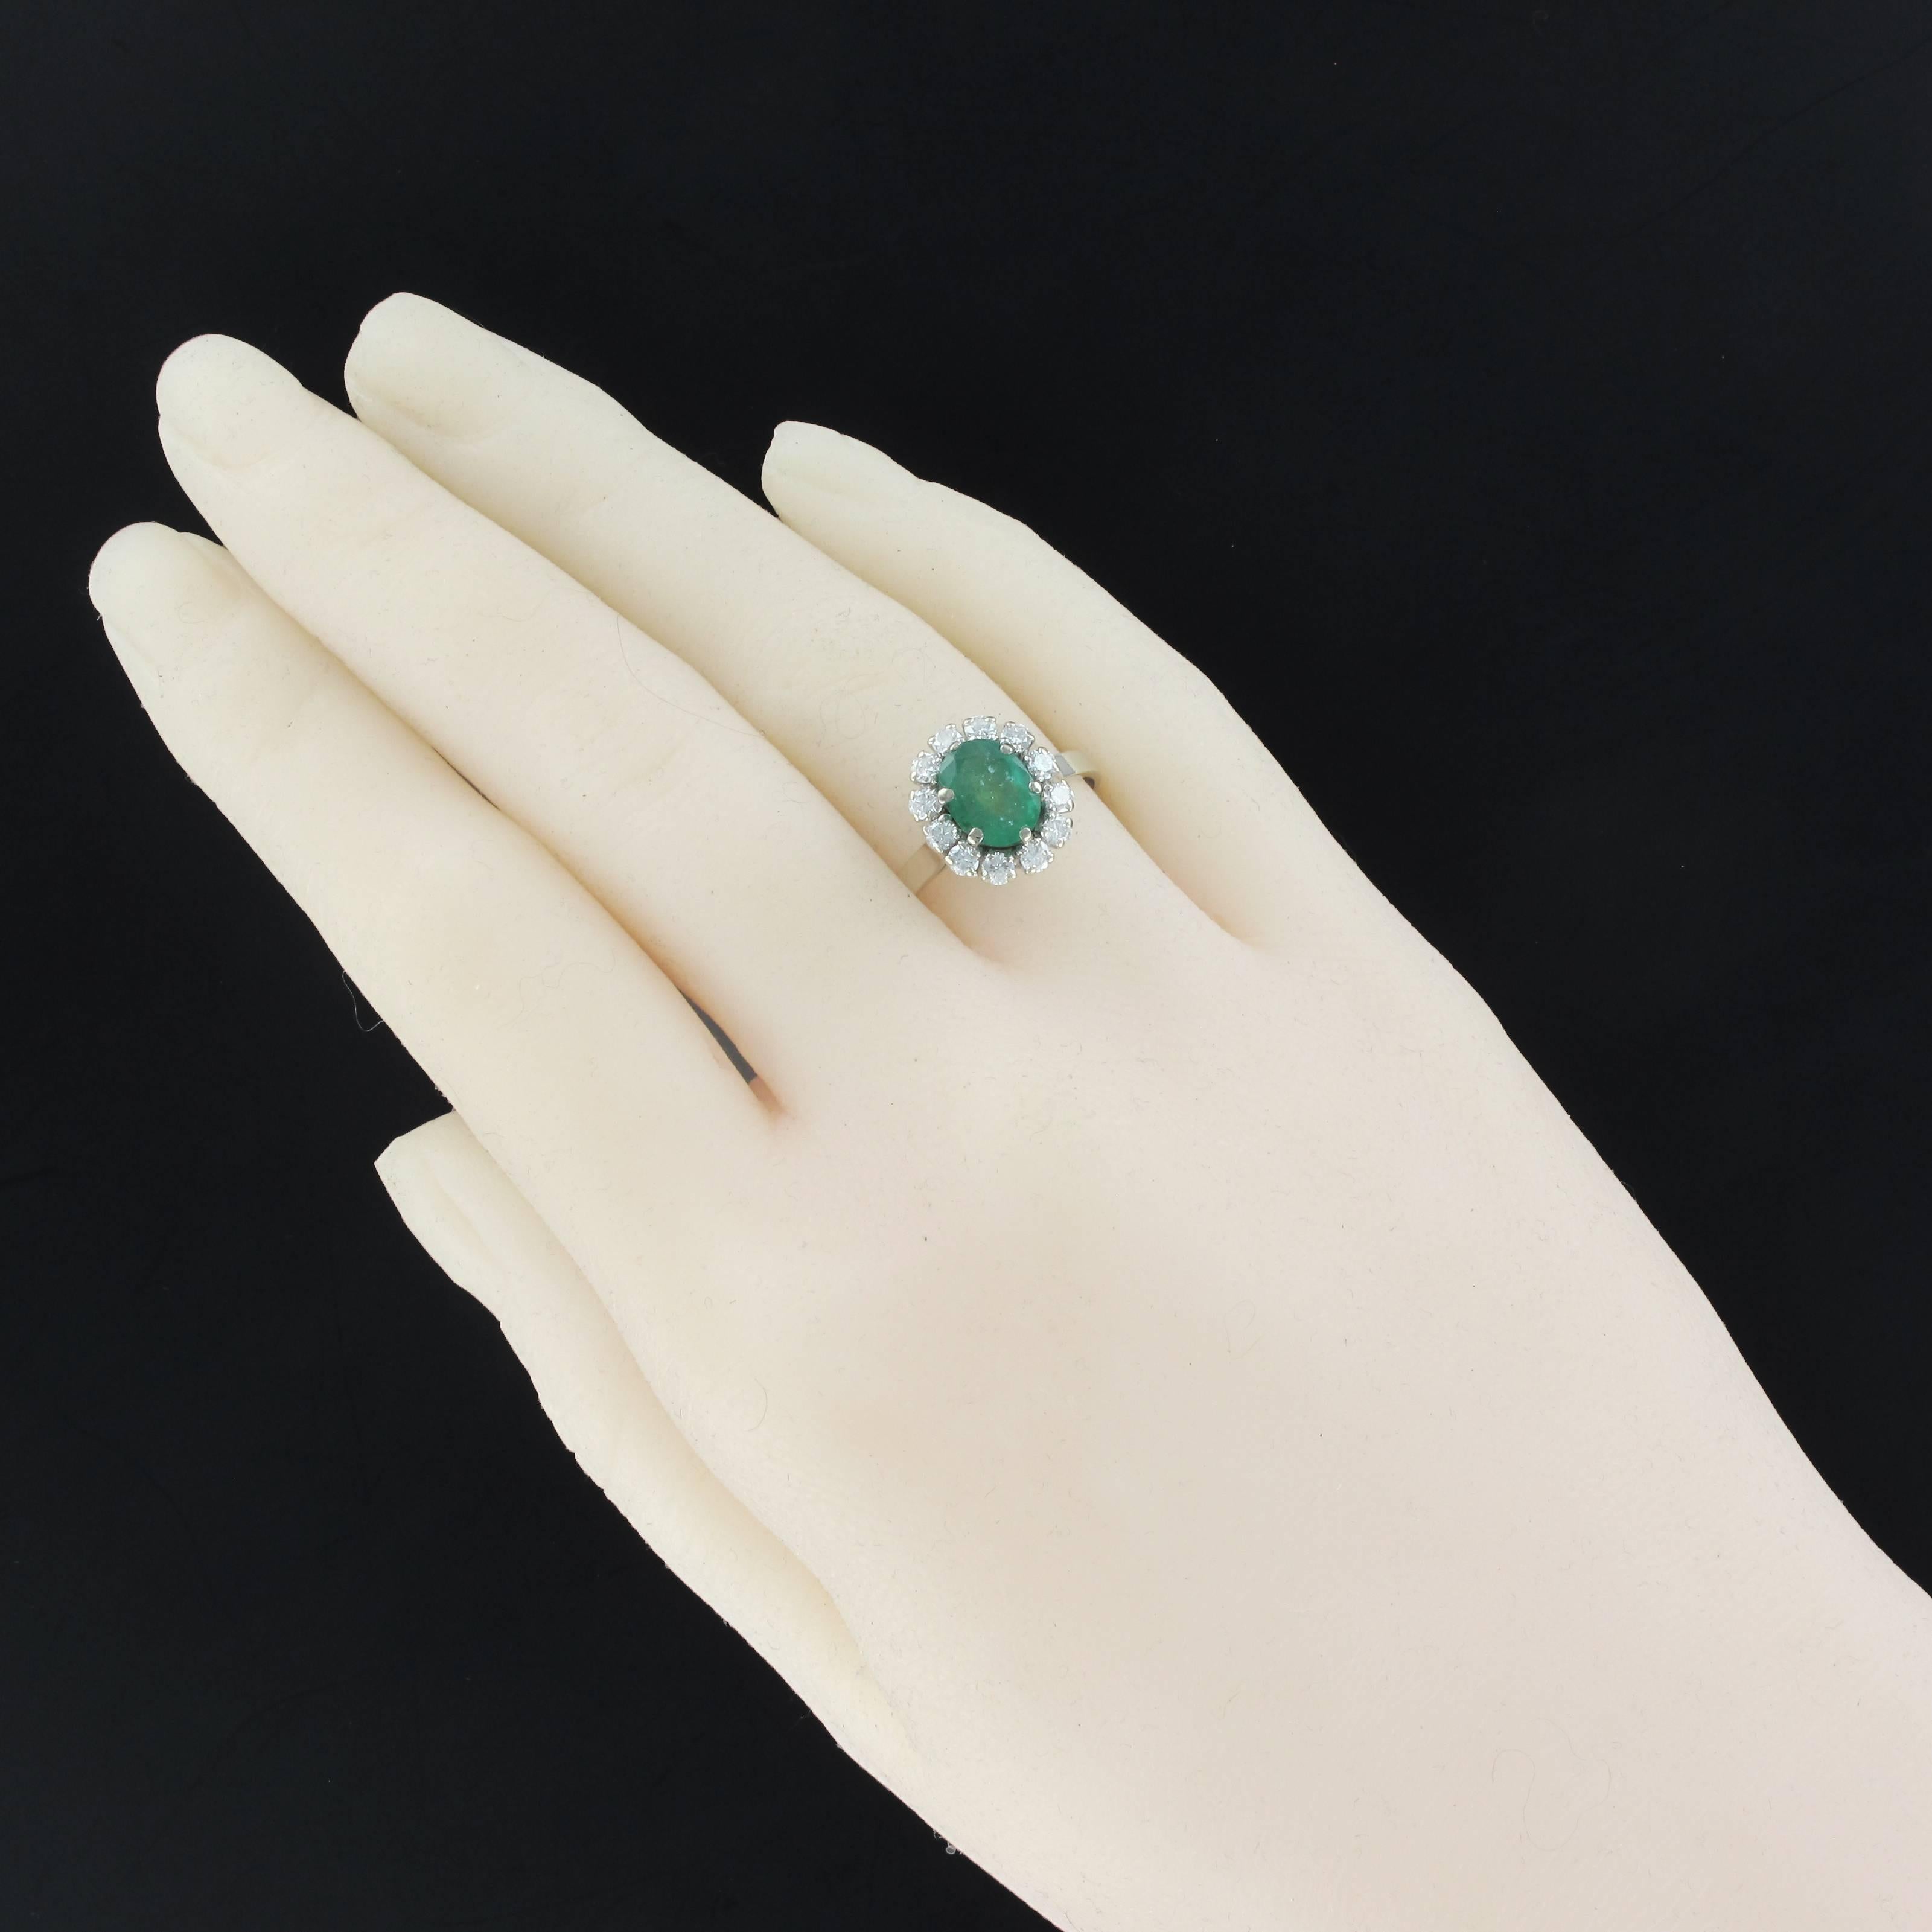 Ring in 18 carats white gold, eagle's head hallmark.
This lovely daisy ring is set with claws in the center of an oval emerald in an entourage of 12 brilliant-cut diamonds. The basket is openwork.
Weight of the emerald: about 1.26 carat, total